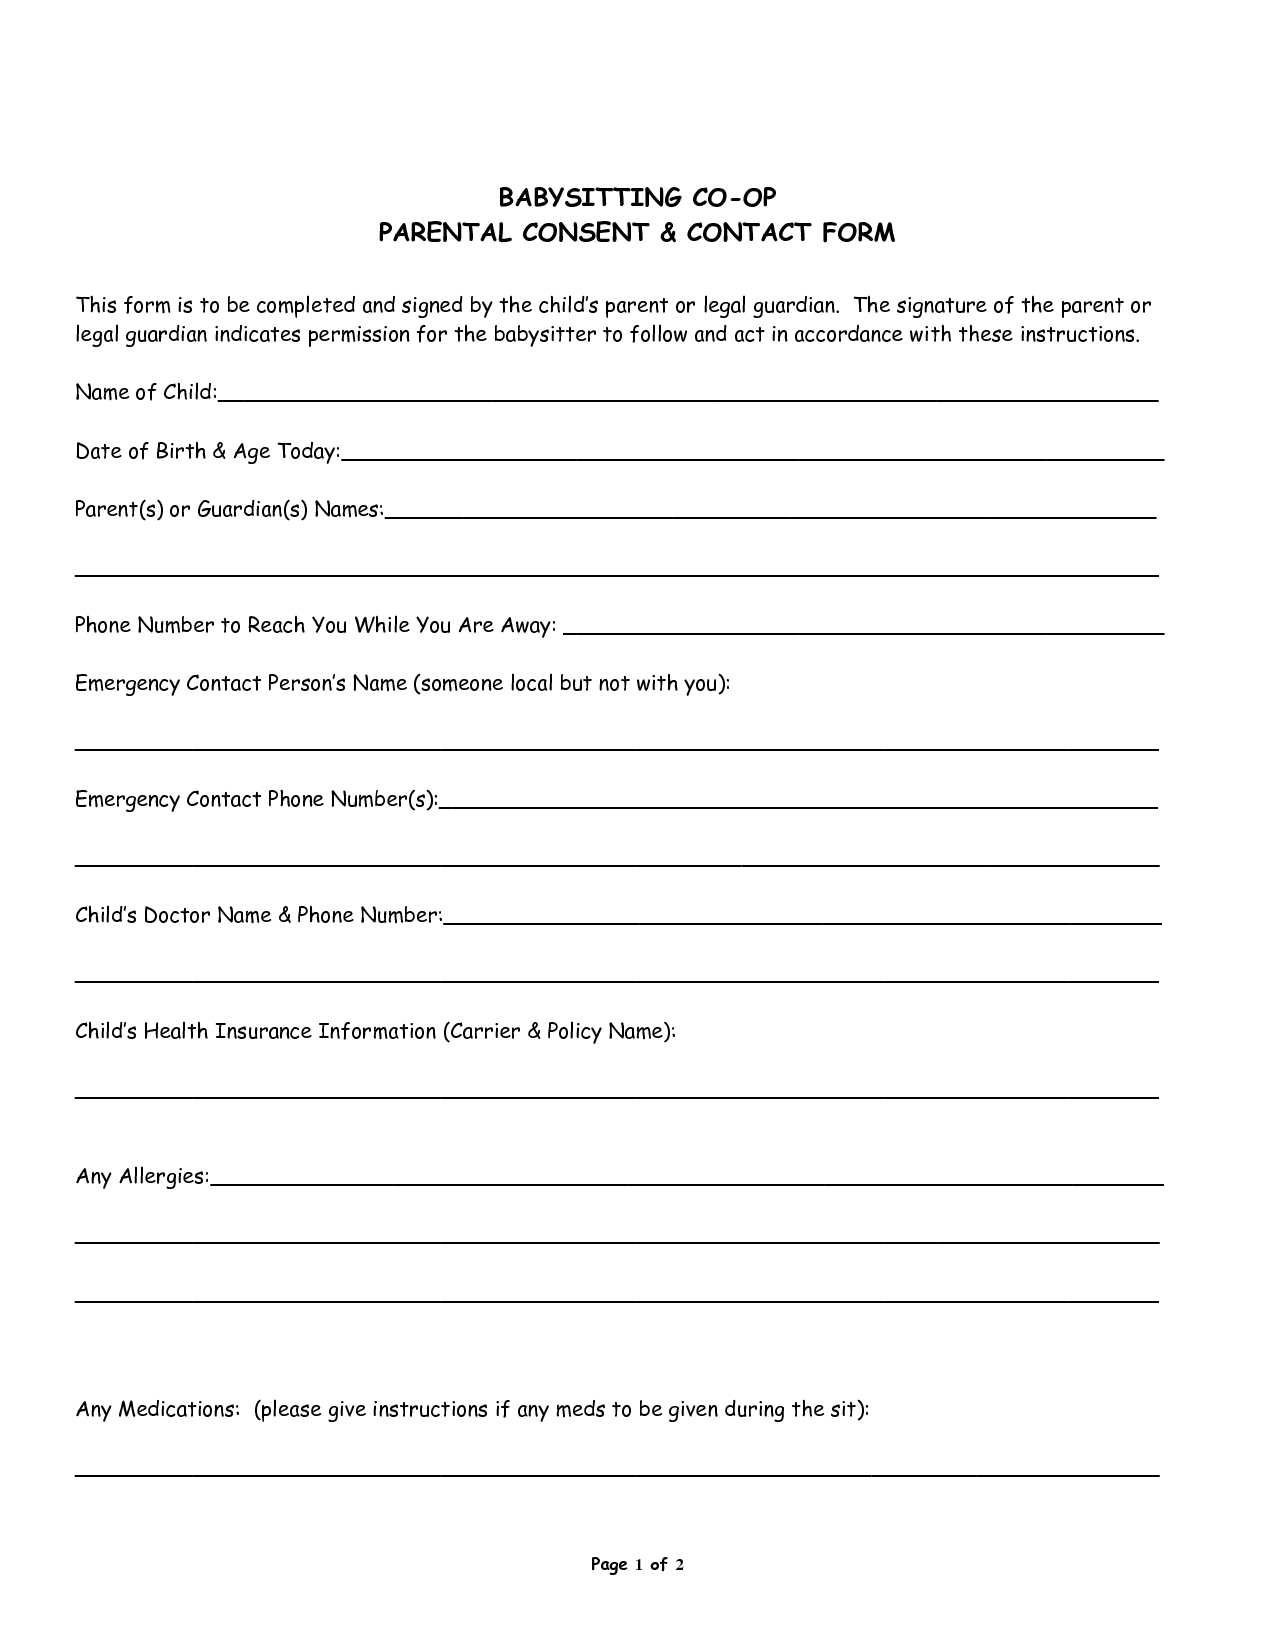 New Free Printable Child Medical Consent Form | Downloadtarget - Free Printable Child Medical Consent Form